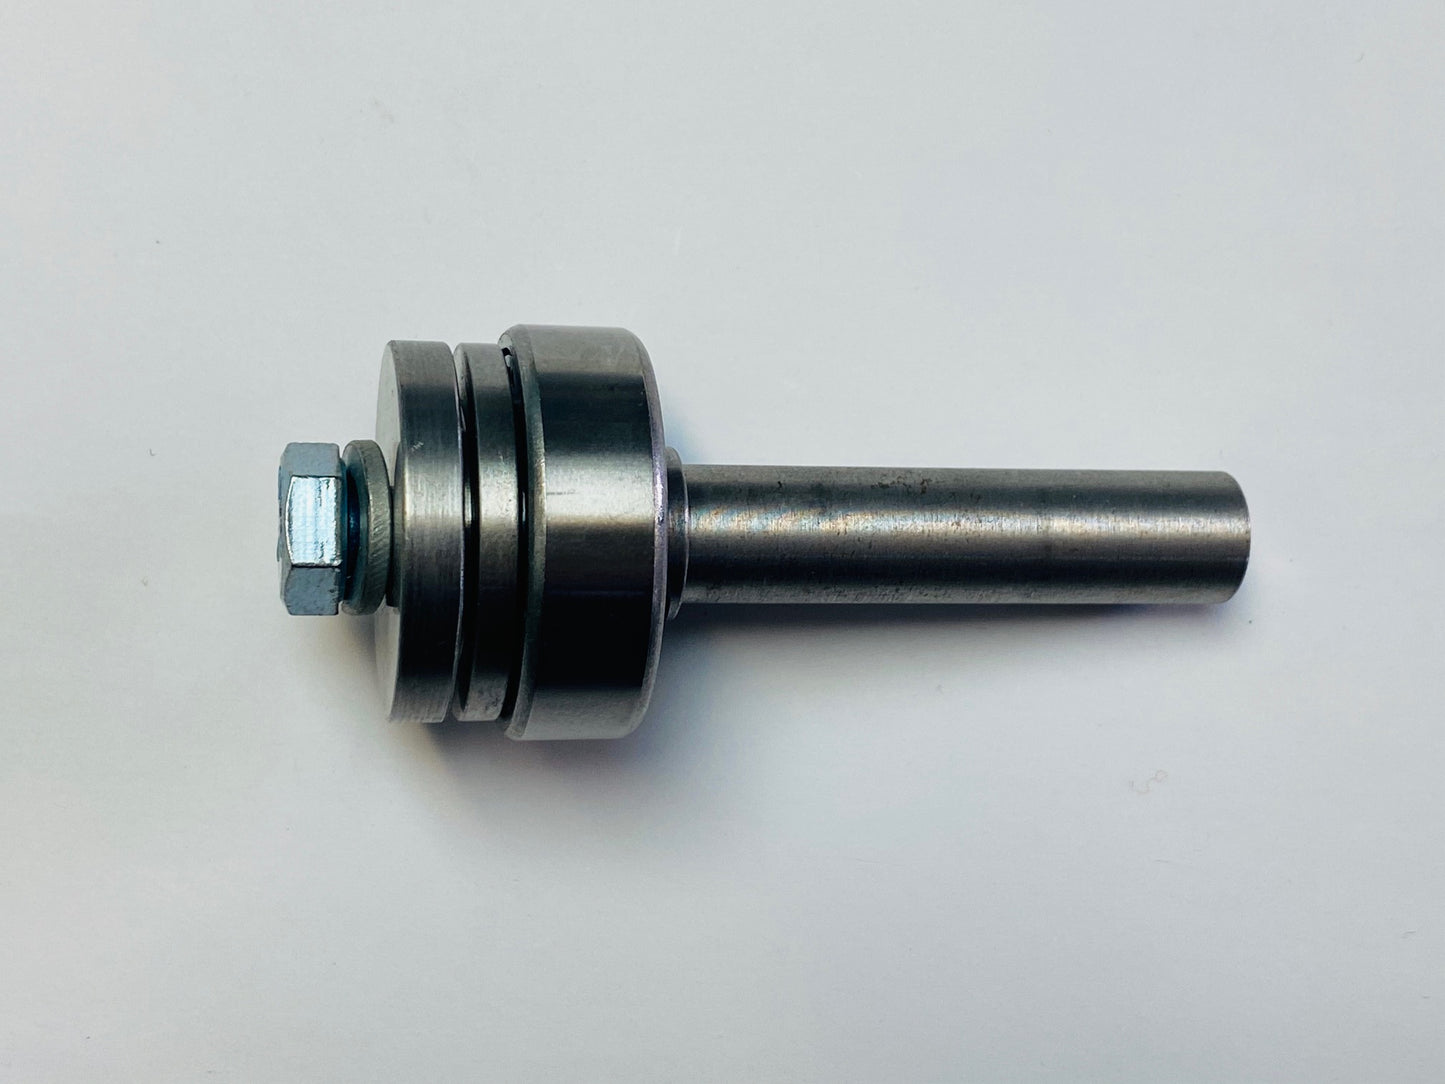 Replacement shaft for pinblock extractor 7000